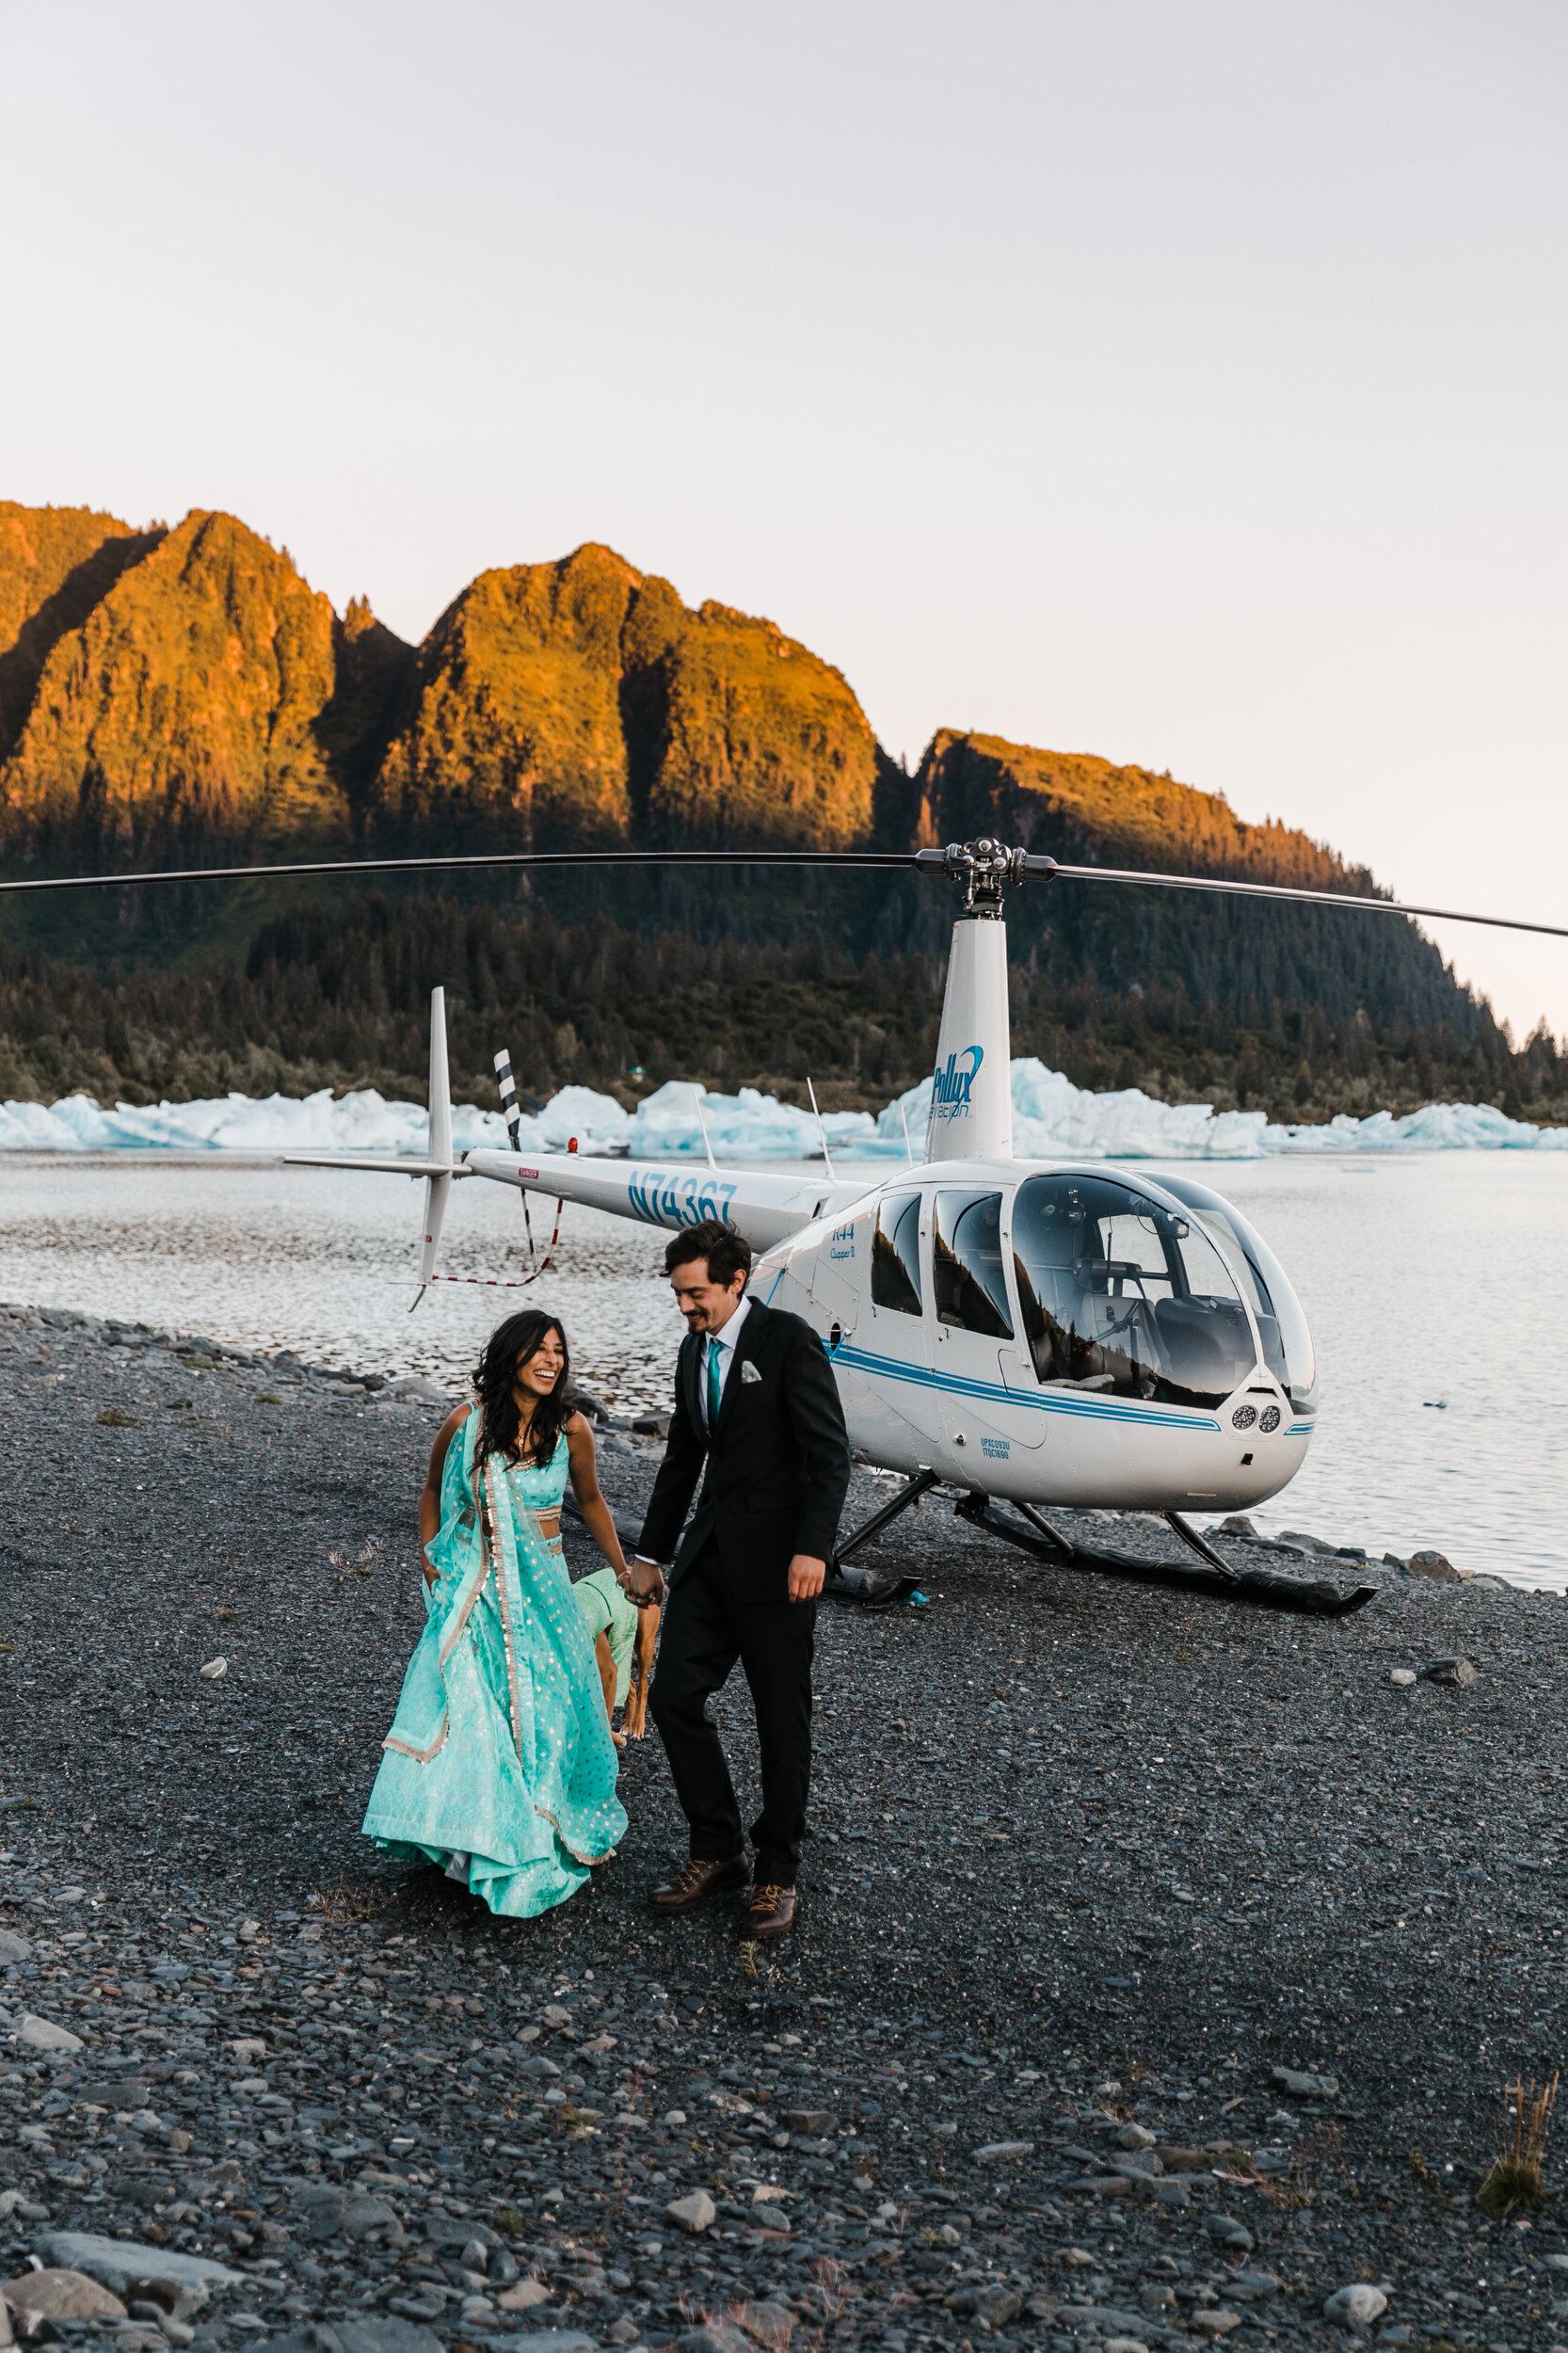 Helicopter Elopement in Alaska | Best of 2020, Our Favorite Wedding Photos of the Year | The Hearnes Adventure Wedding Photography